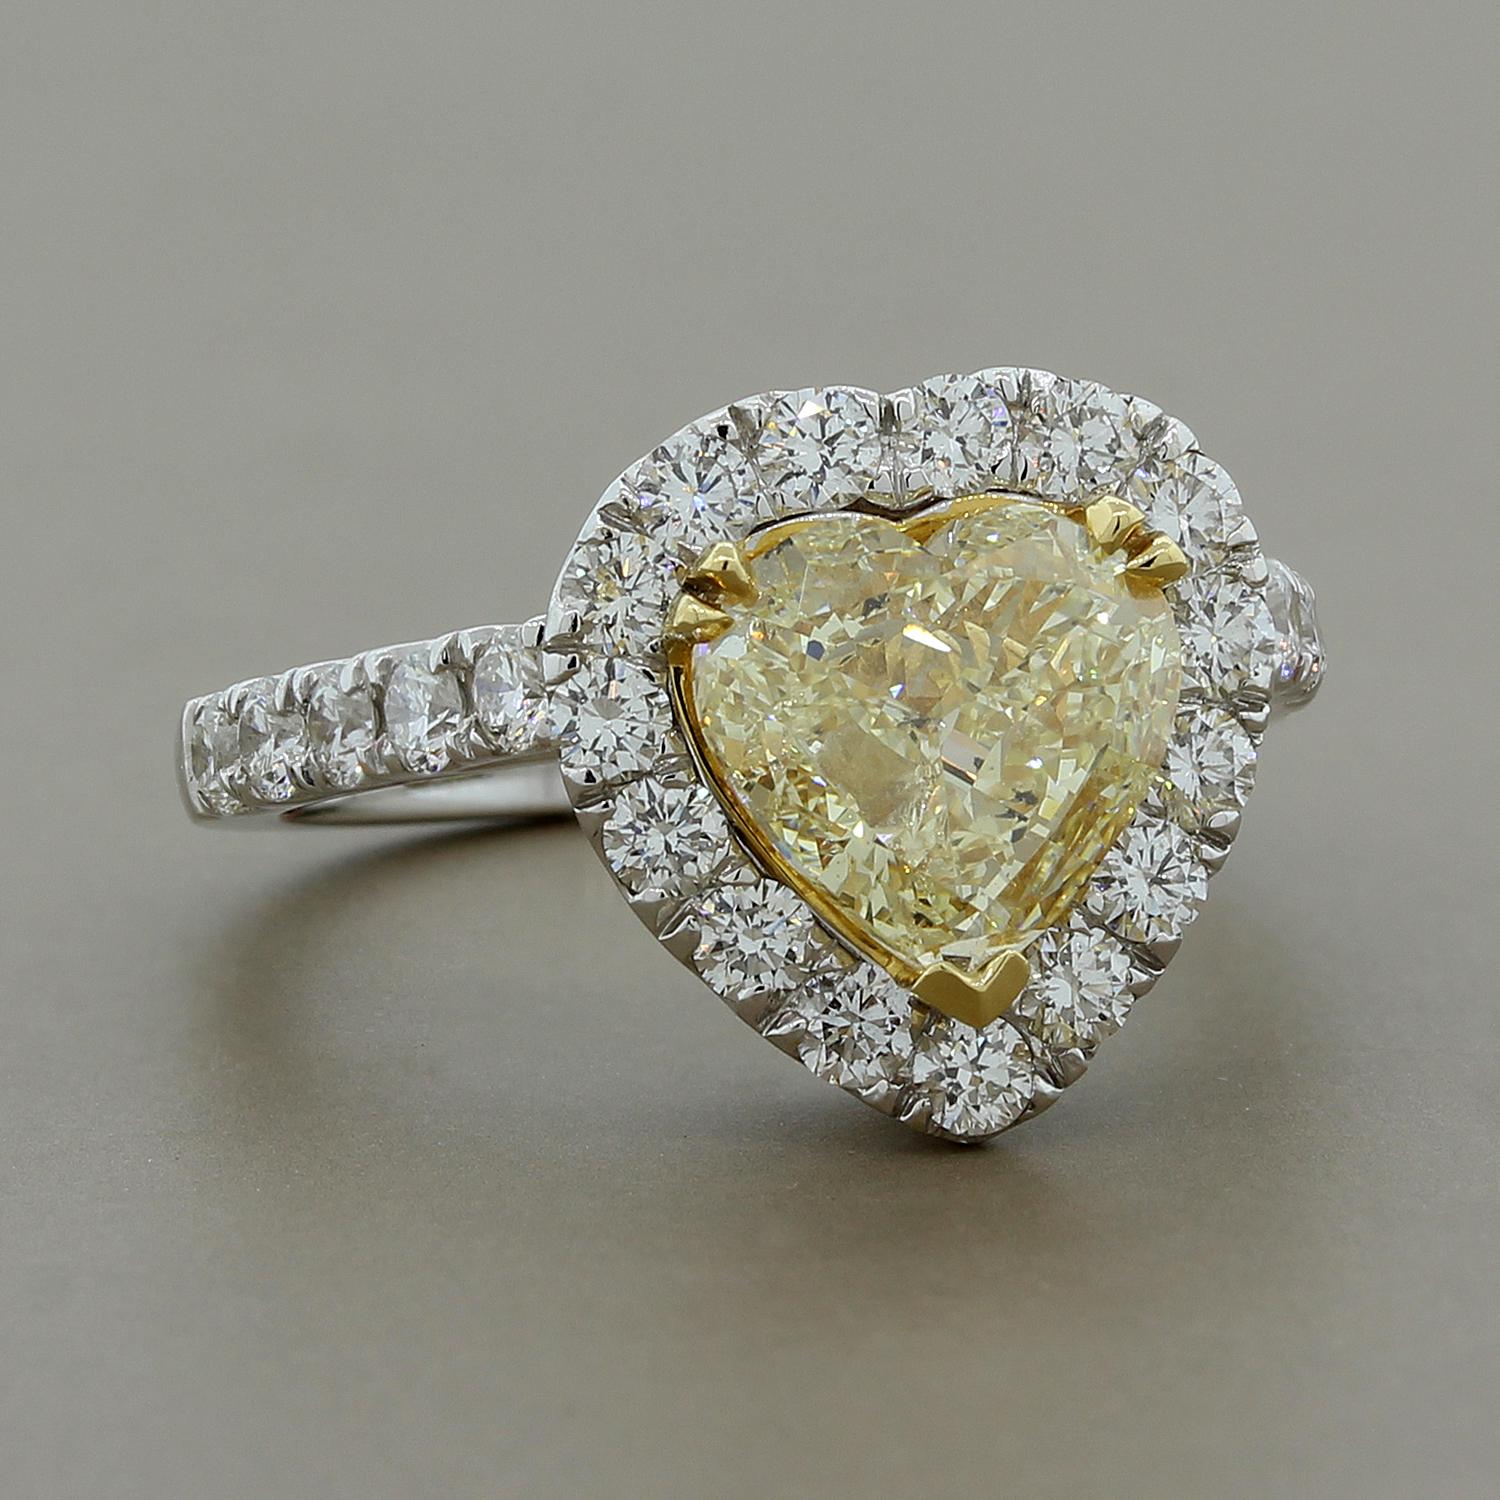 When you’re at a loss for words this spectacular ring is all you need! A 2.01 carat fancy yellow heart cut diamond is set in 18K yellow gold and is haloed by 1.04 carats of round cut white diamonds set in 18K white gold.  We love the heart shape for